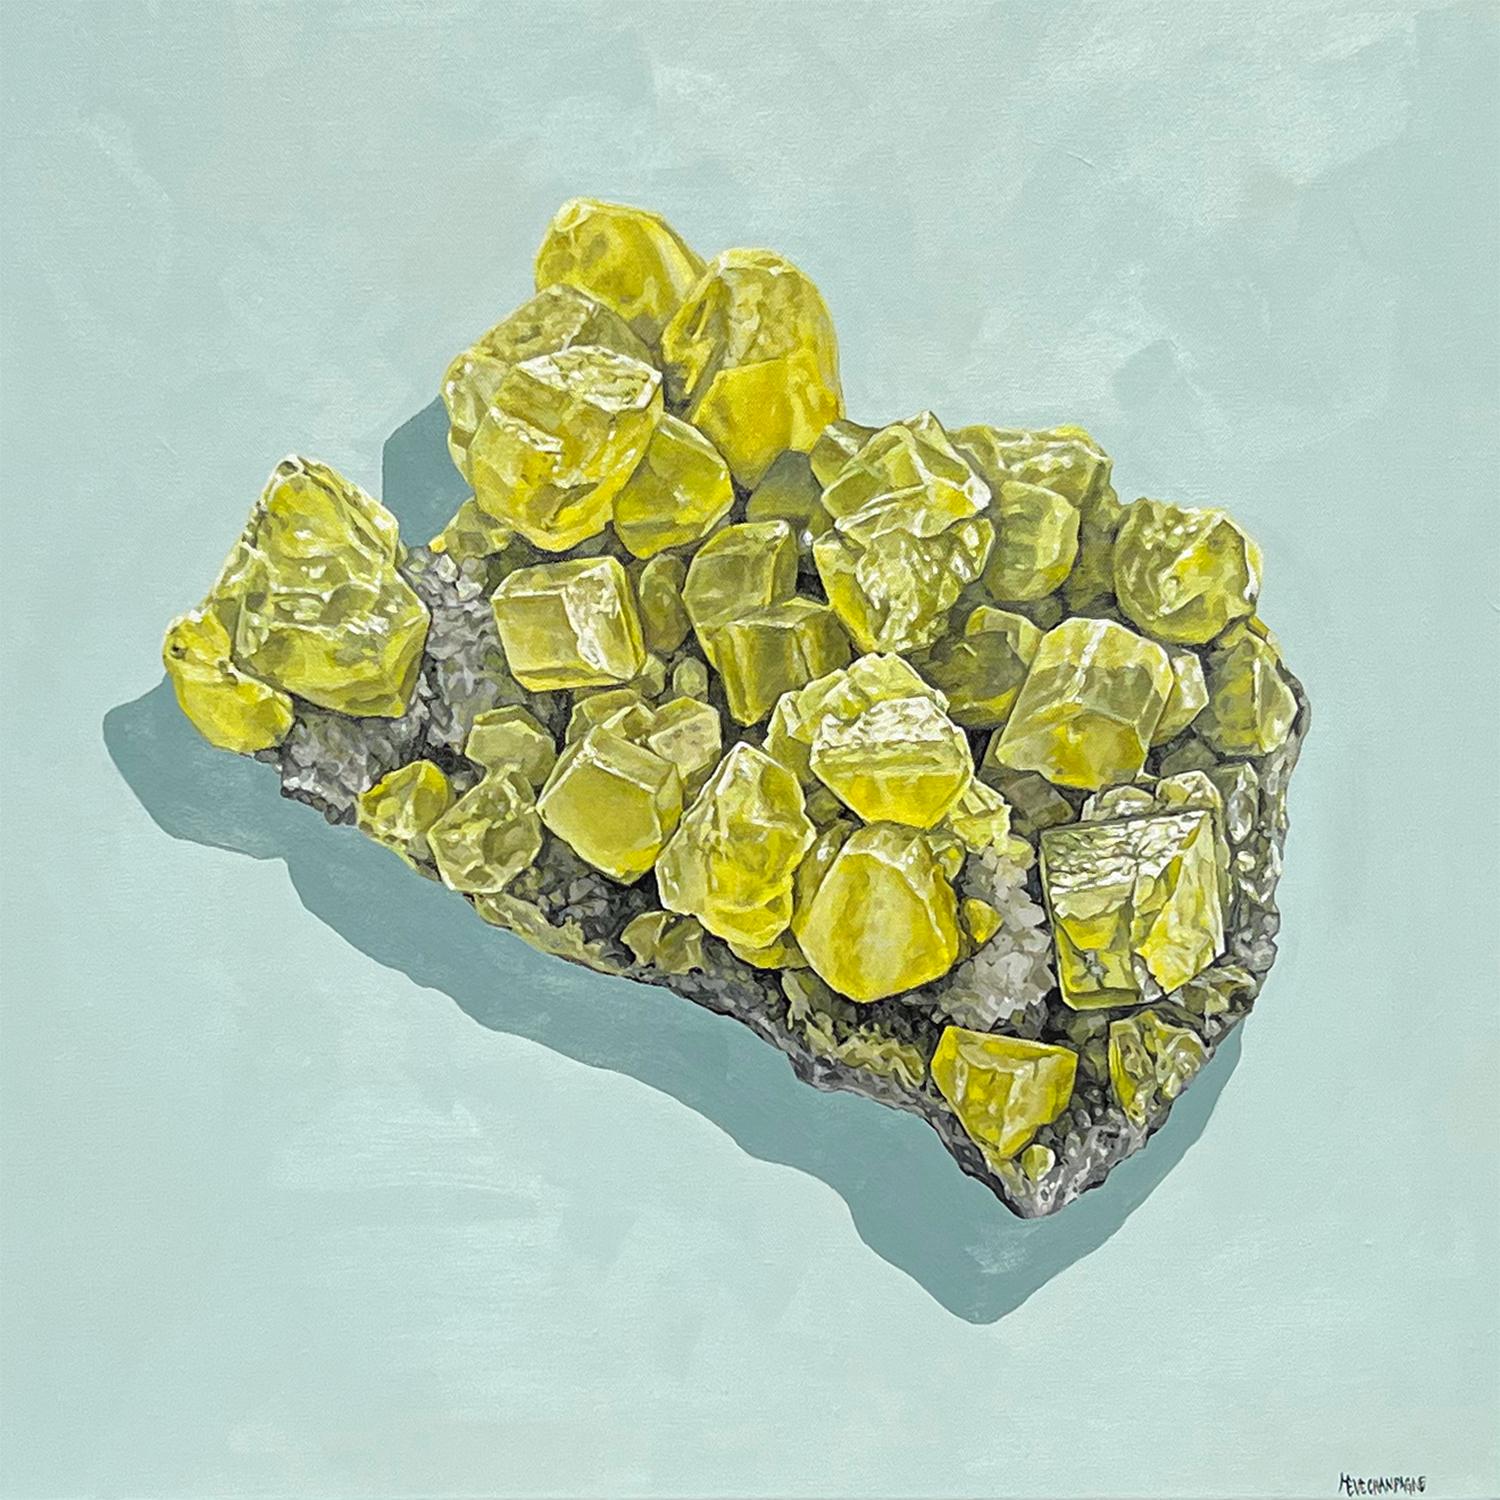 Marie-Eve Champagne Still-Life Painting - Of Rocks and Colors - Sulphur Shine, Original Painting